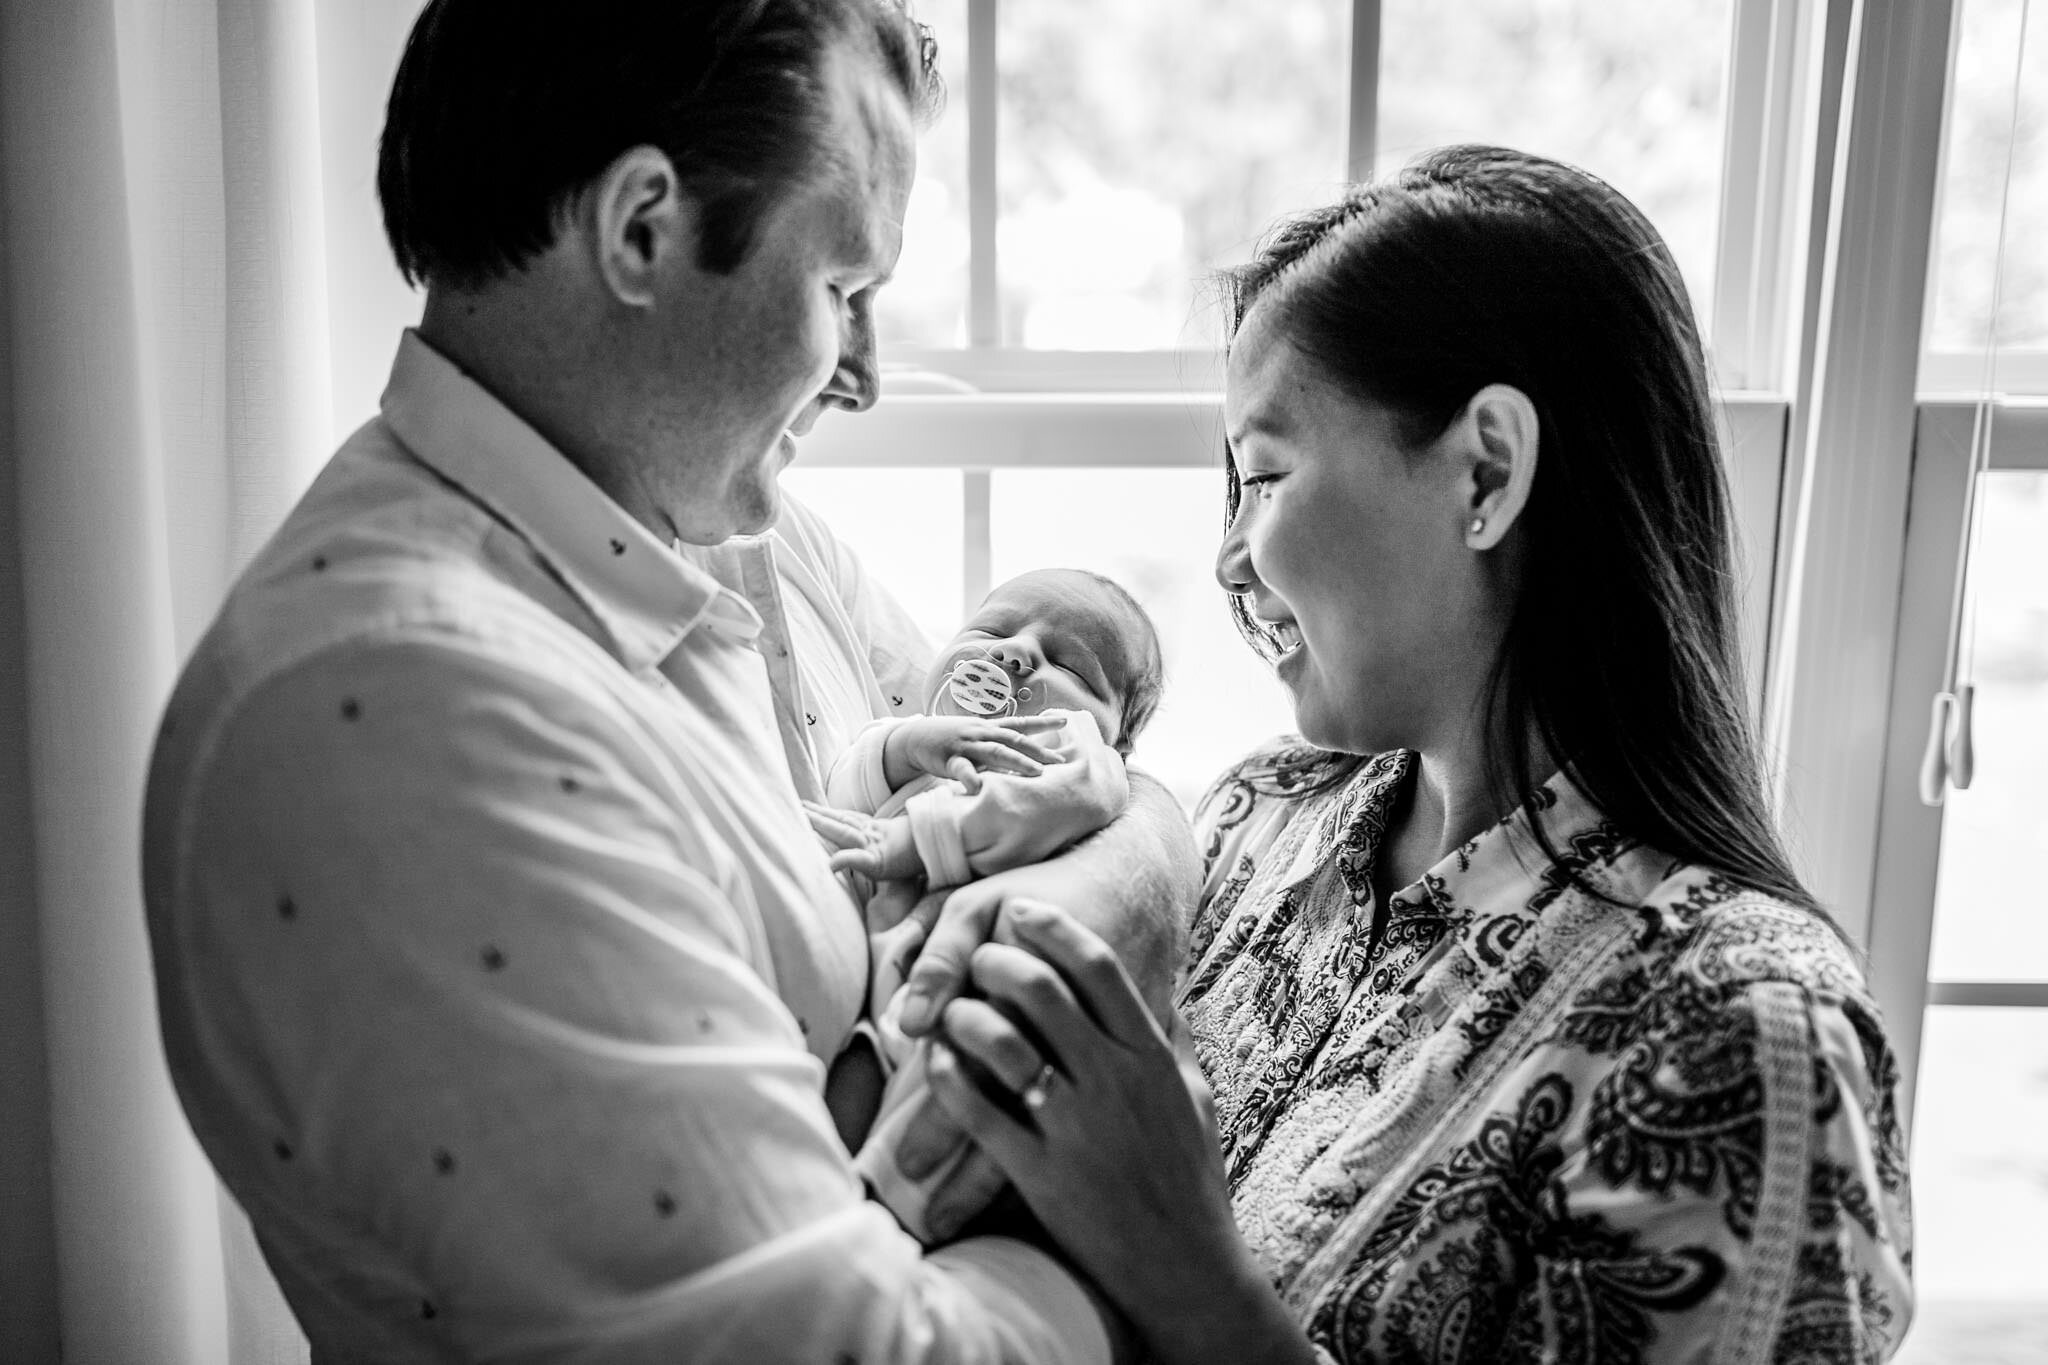 Pittsboro Newborn Photographer | By G. Lin Photography | Beautiful black and white photo of parents holding baby by the window